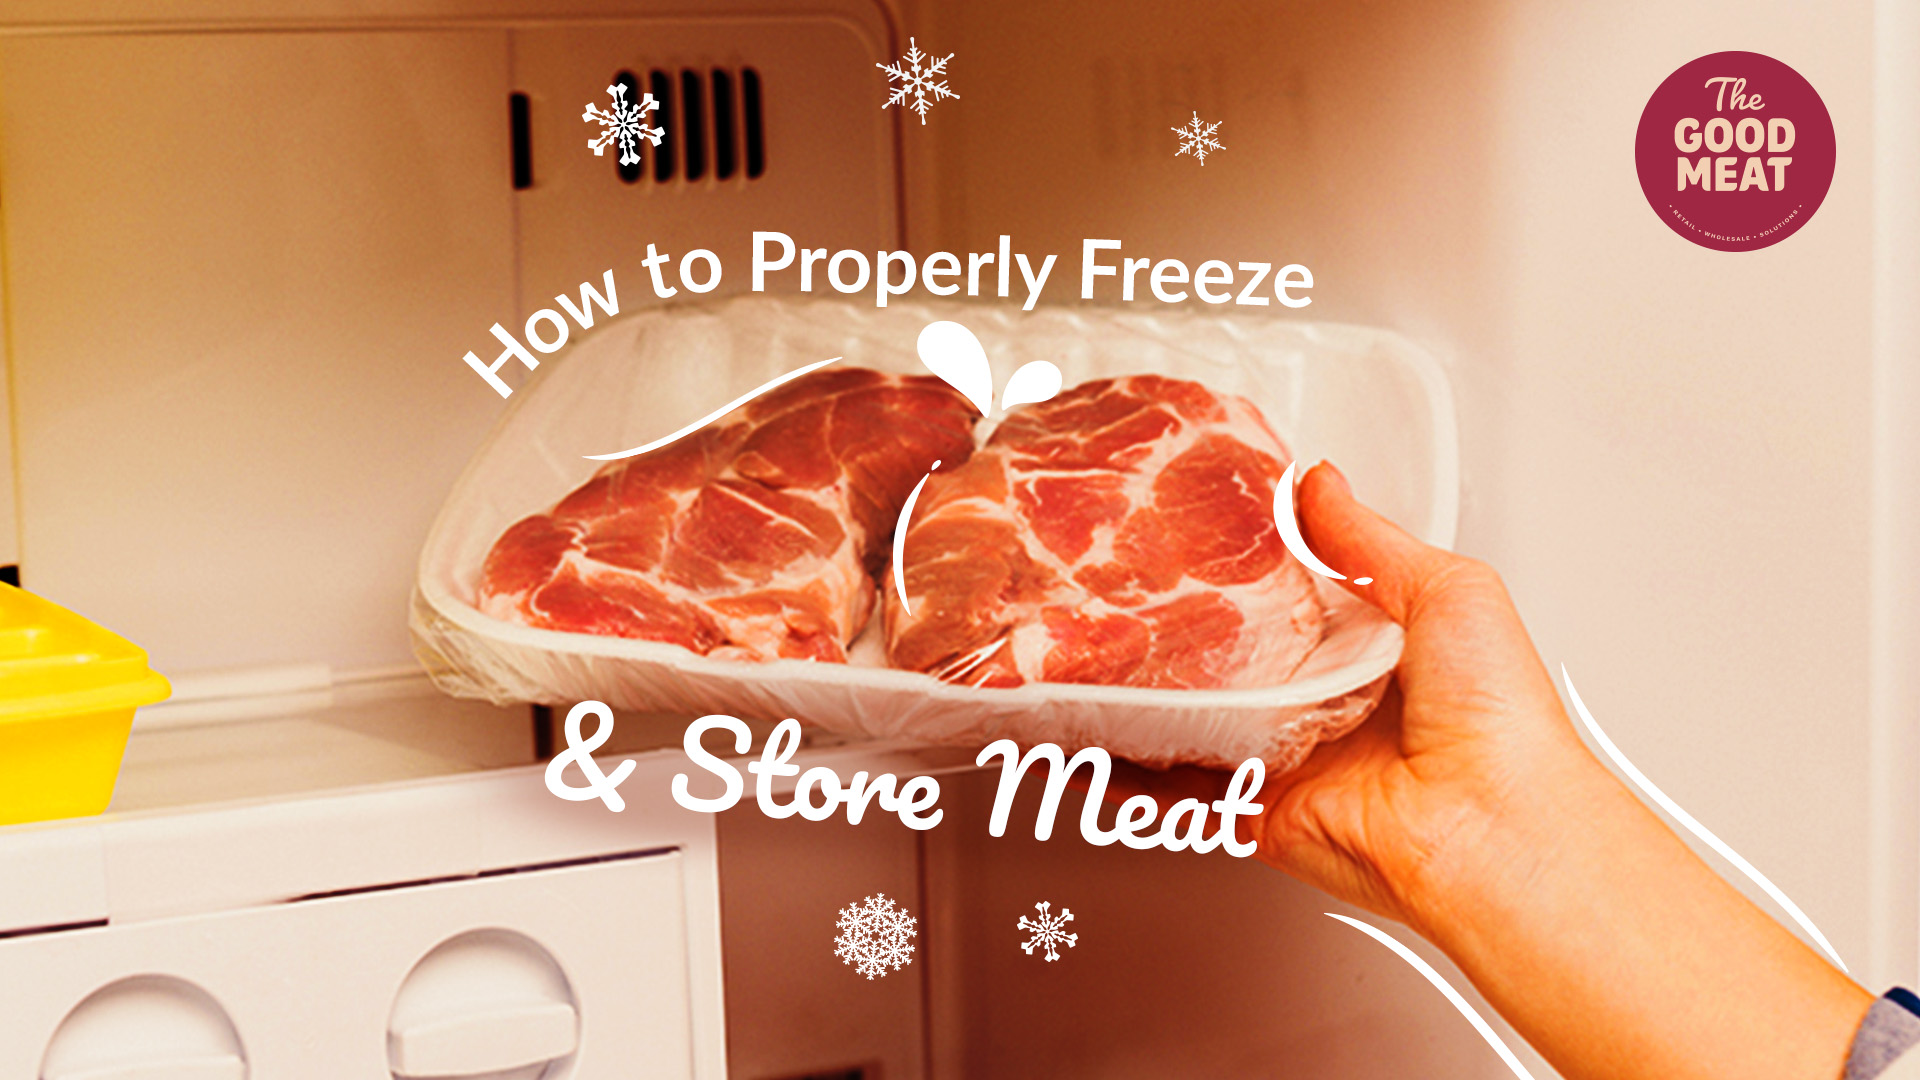 How To Properly Freeze & Store Meat